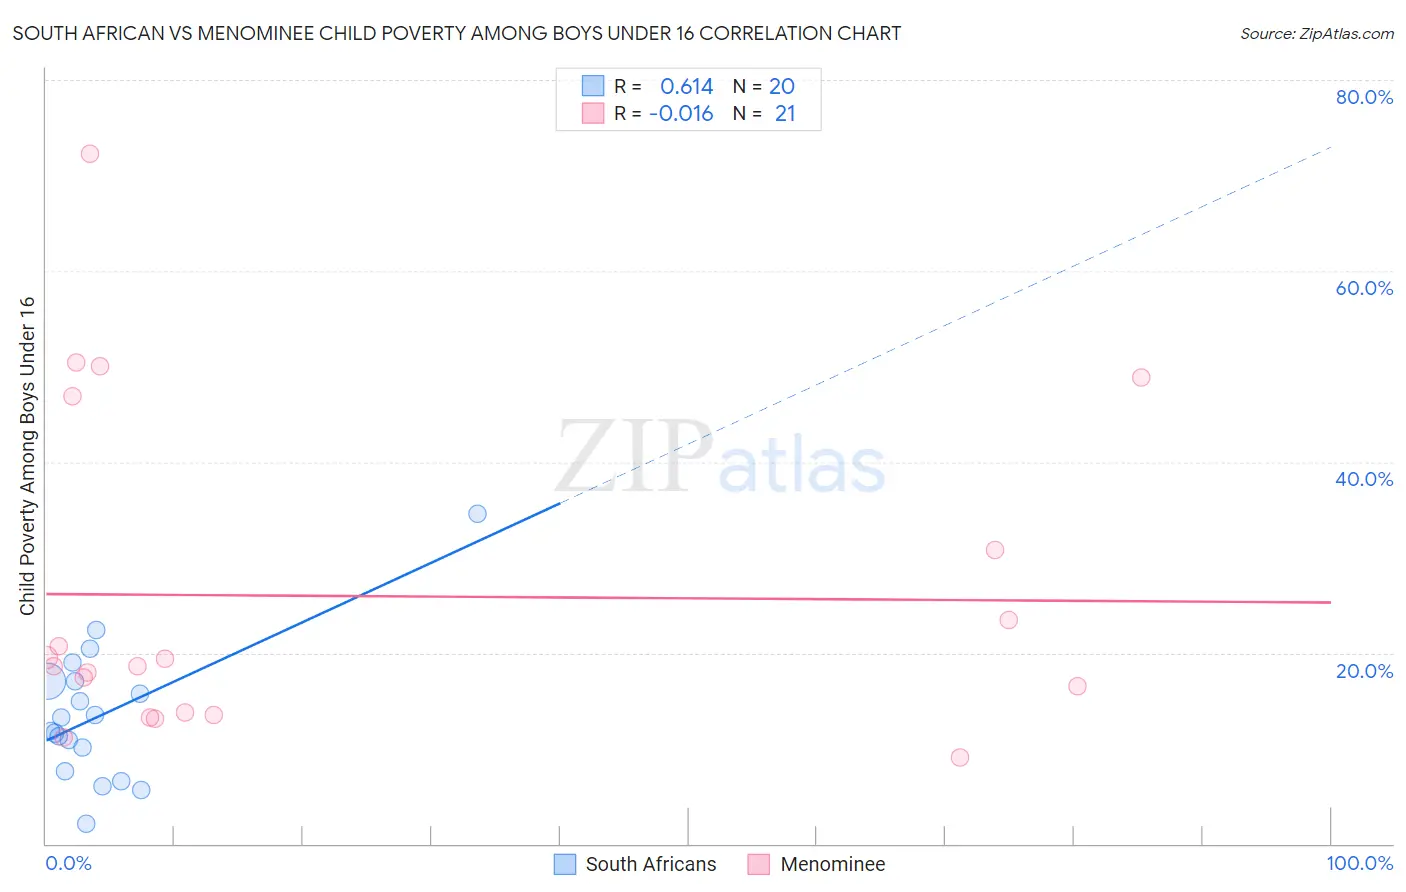 South African vs Menominee Child Poverty Among Boys Under 16